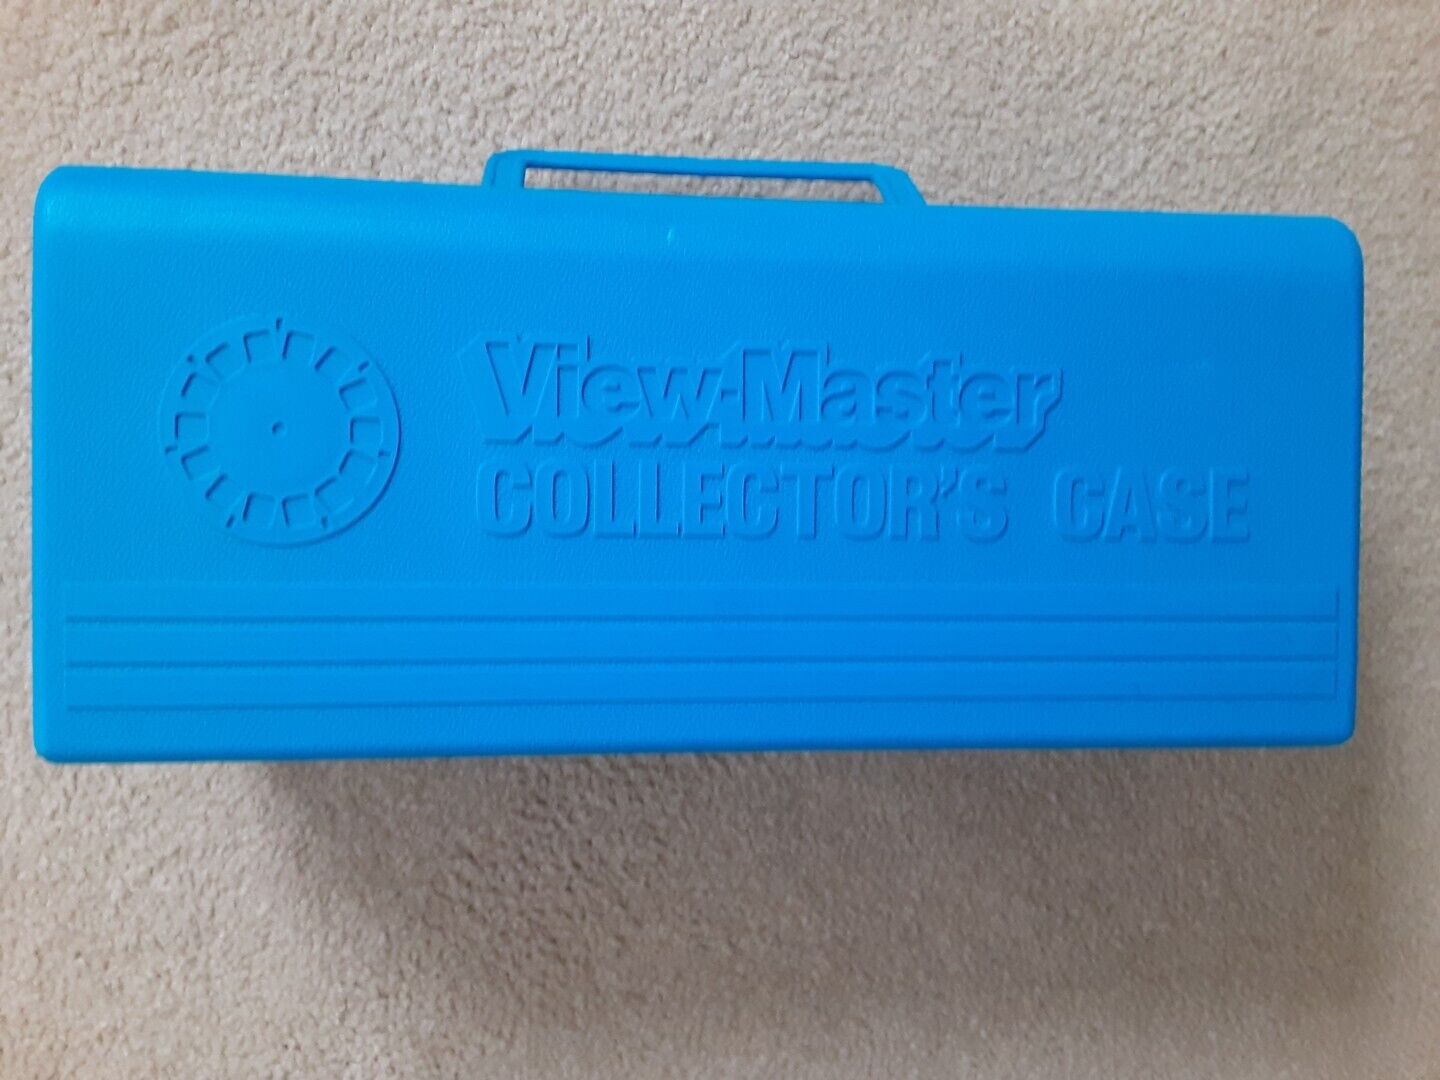 Vintage View-master Collector's Case (Blue), Viewer and Children's Reels